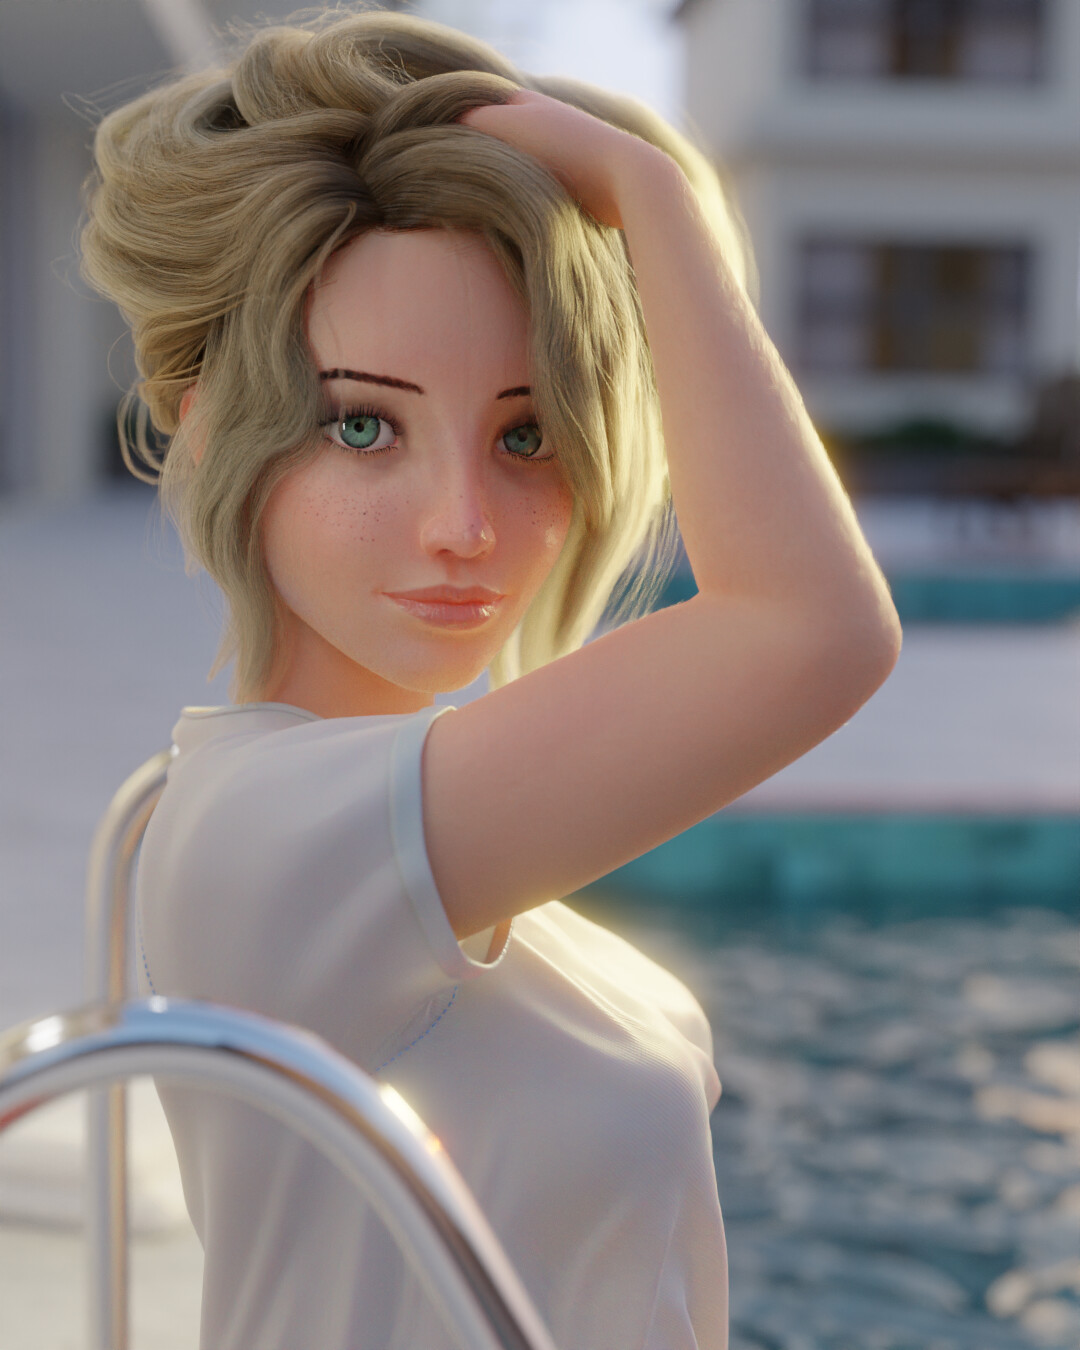 1080px x 1350px - Blondie at the pool - Finished Projects - Blender Artists Community